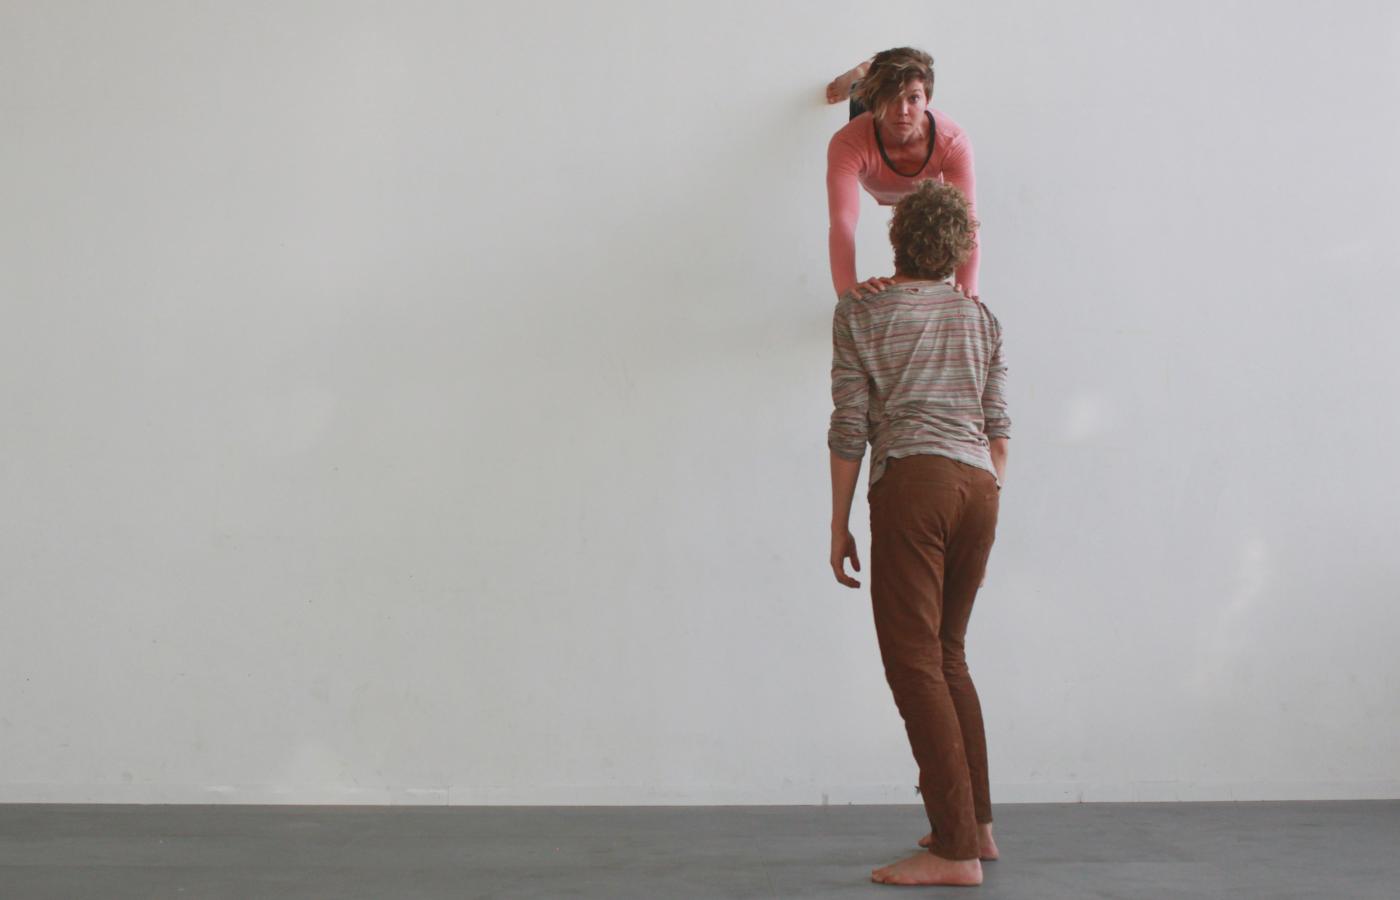 A white woman dances on a wall while leaning on a white man.